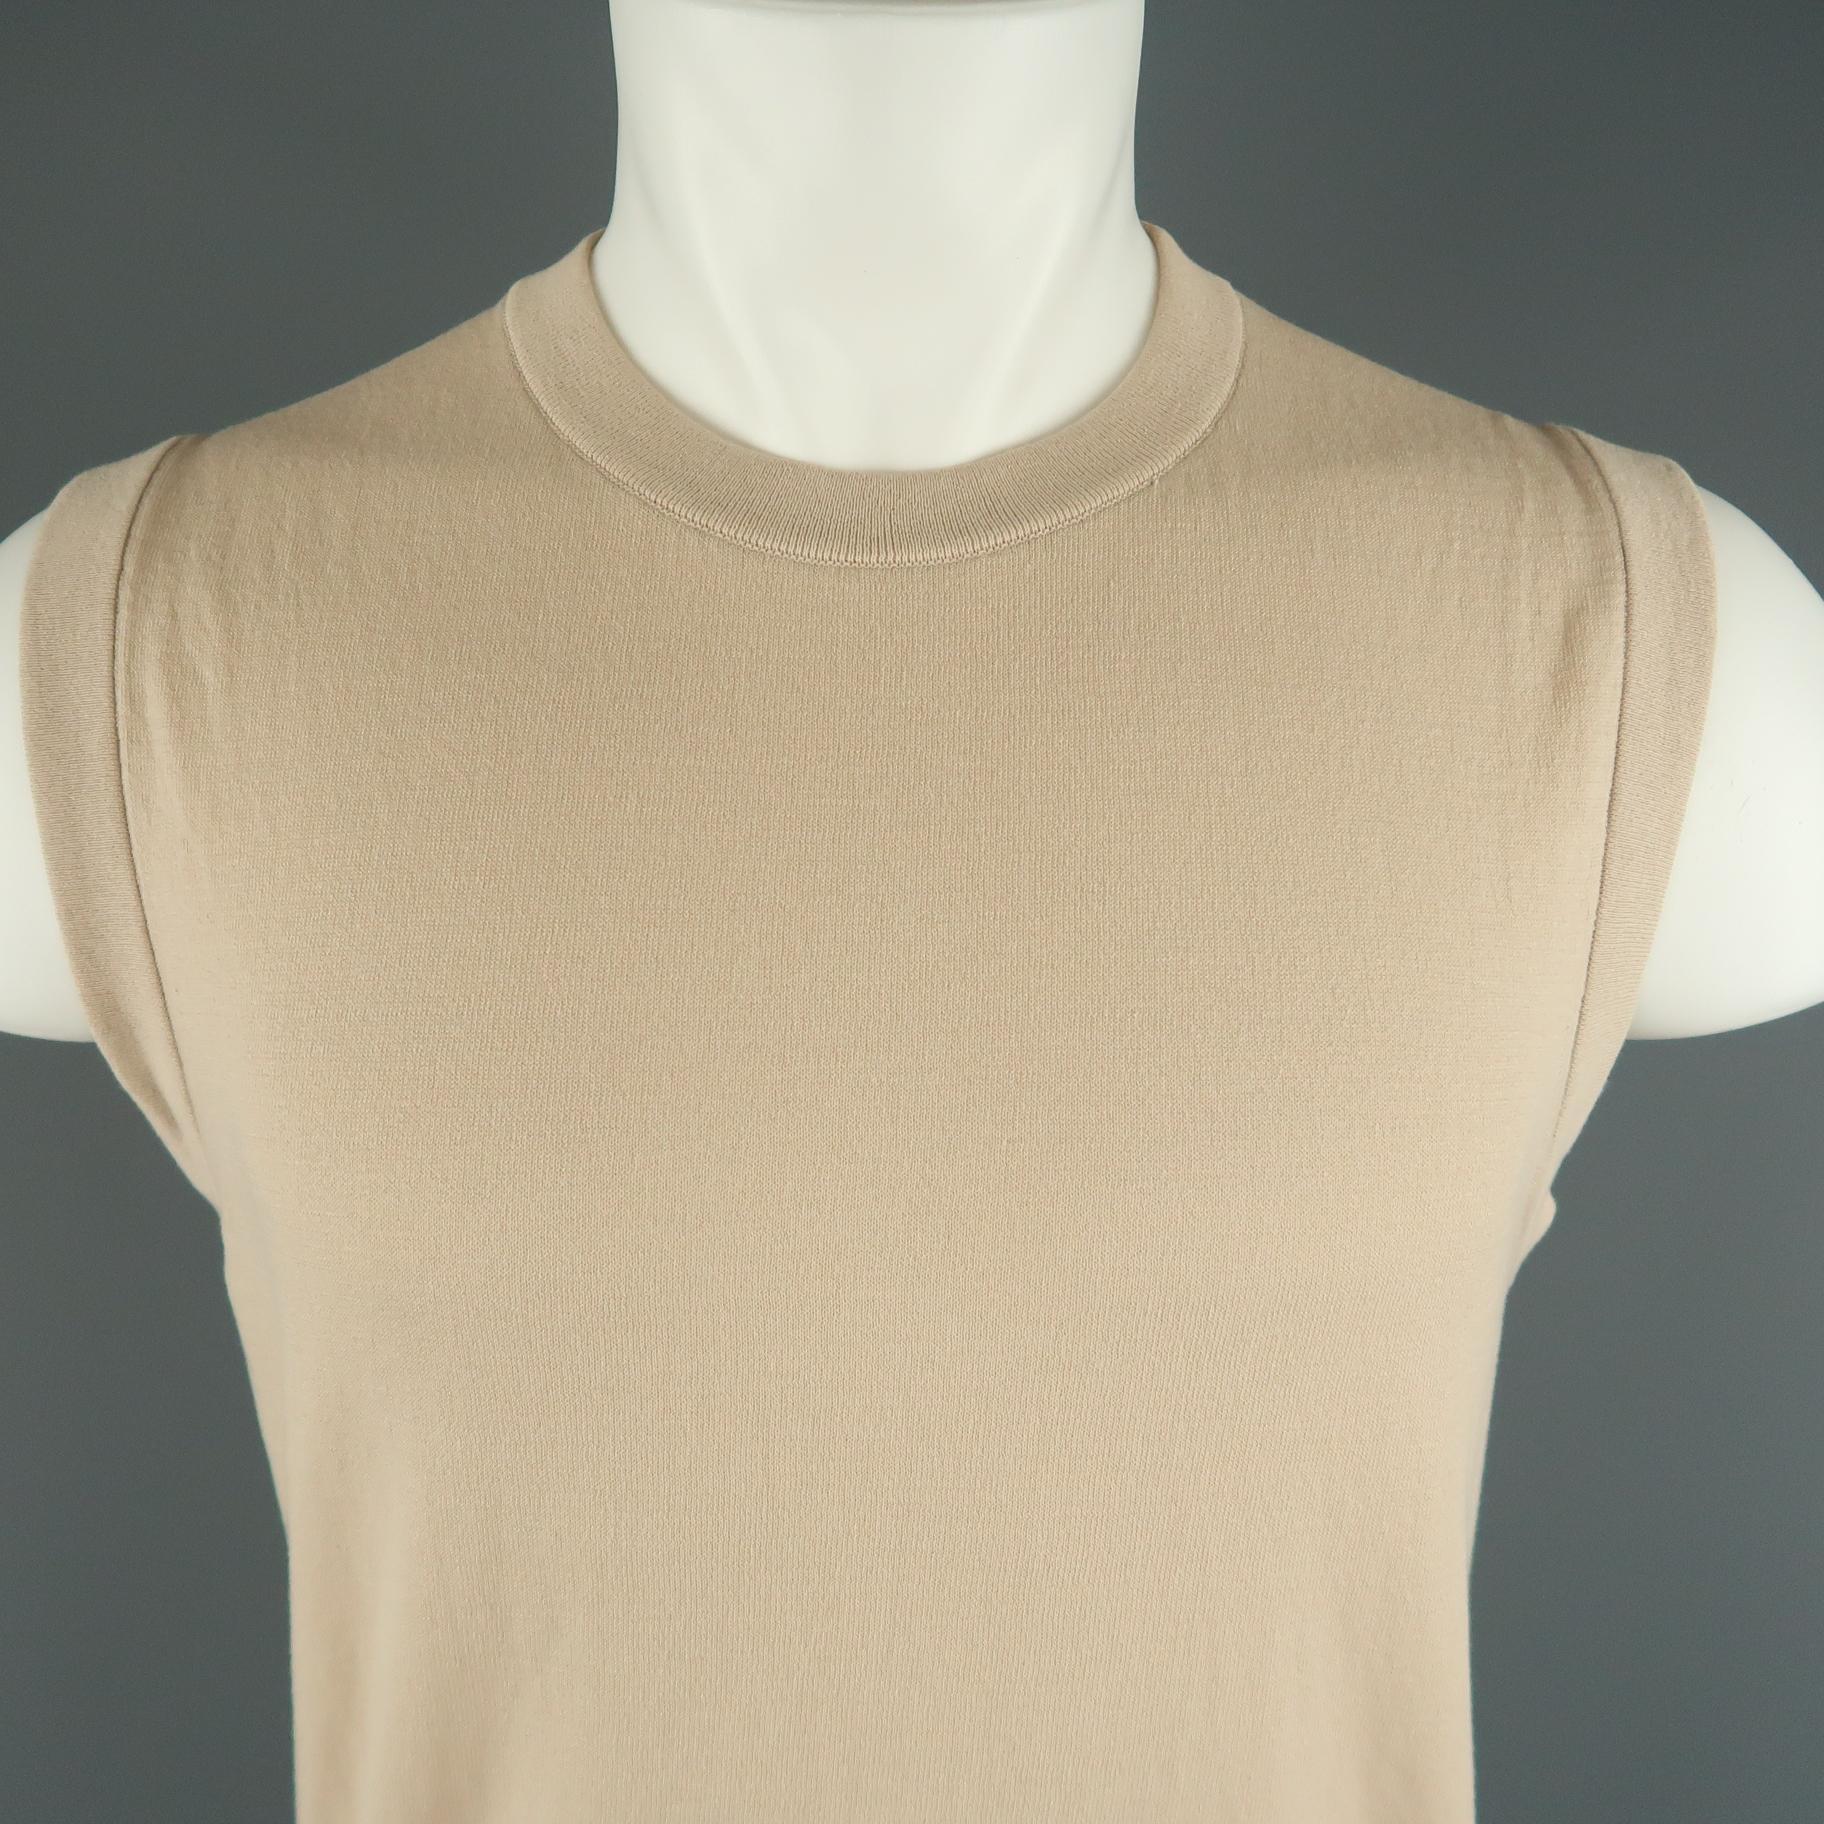 DIOR HOMME vest comes in a peachy beige wool blend knit with a crewneck and signature back stitches. Spring/Summer 2013. Made in Italy.
 
Excellent Pre-Owned Condition.
Marked: M
 
Measurements:
 
Shoulder: 16 in.
Chest: 40 in.
Length: 27 in.